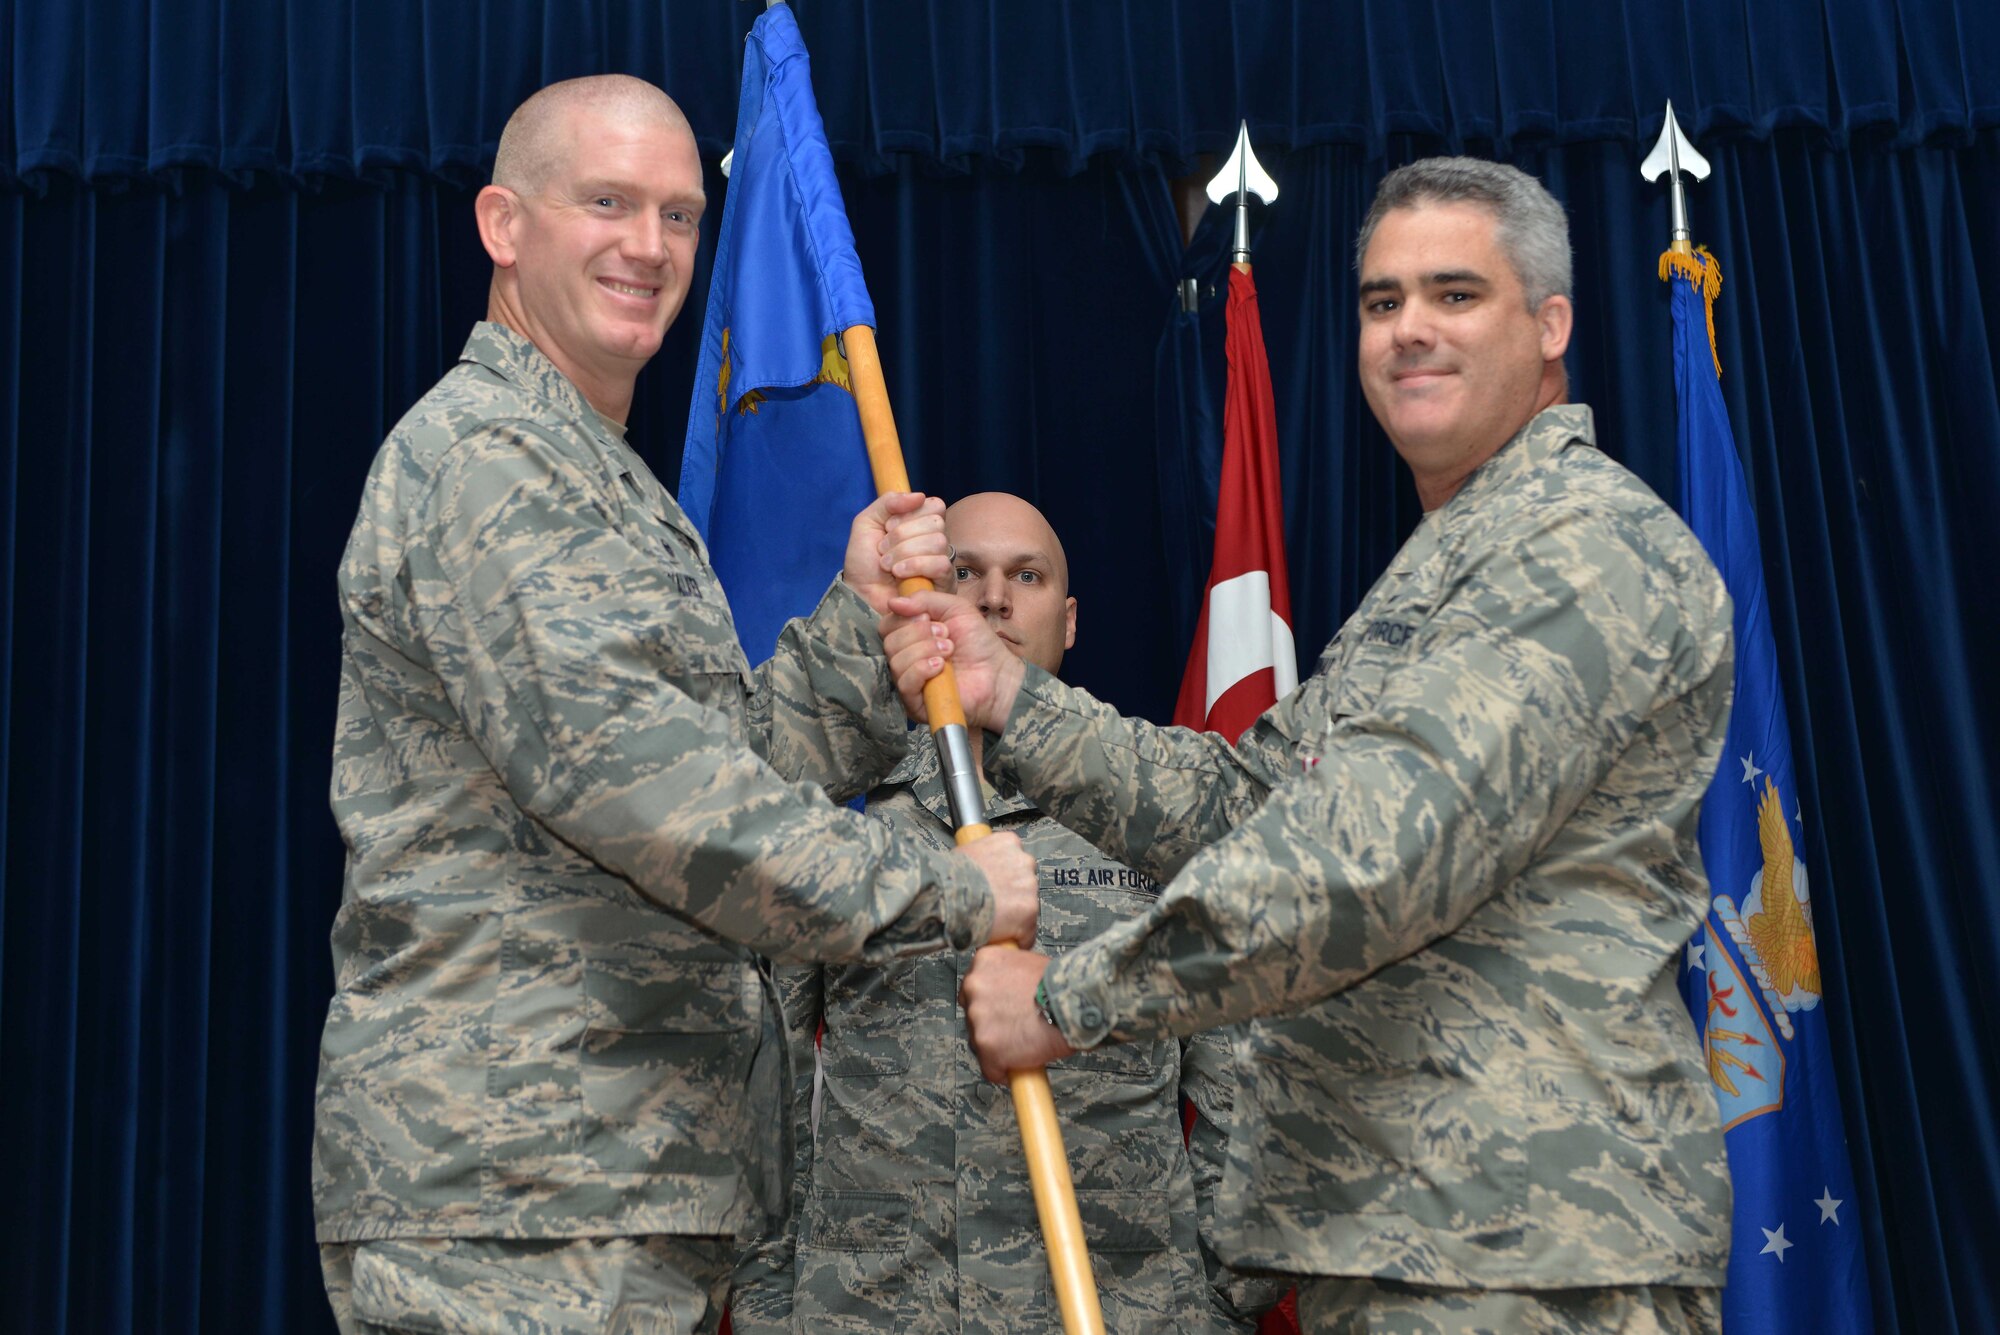 U.S. Air Force Lt. Col. Erin McDonald, 39th Communications Squadron outgoing commander, relinquishes command to U.S. Air Force Col. John Walker, 39th Air Base Wing commander, during a change of command ceremony June 14, 2016, at Incirlik Air Base, Turkey. McDonald’s next assignment will be at Fort Meade, Maryland. (U.S. Air Force photo by Senior Airman John Nieves Camacho/Released)